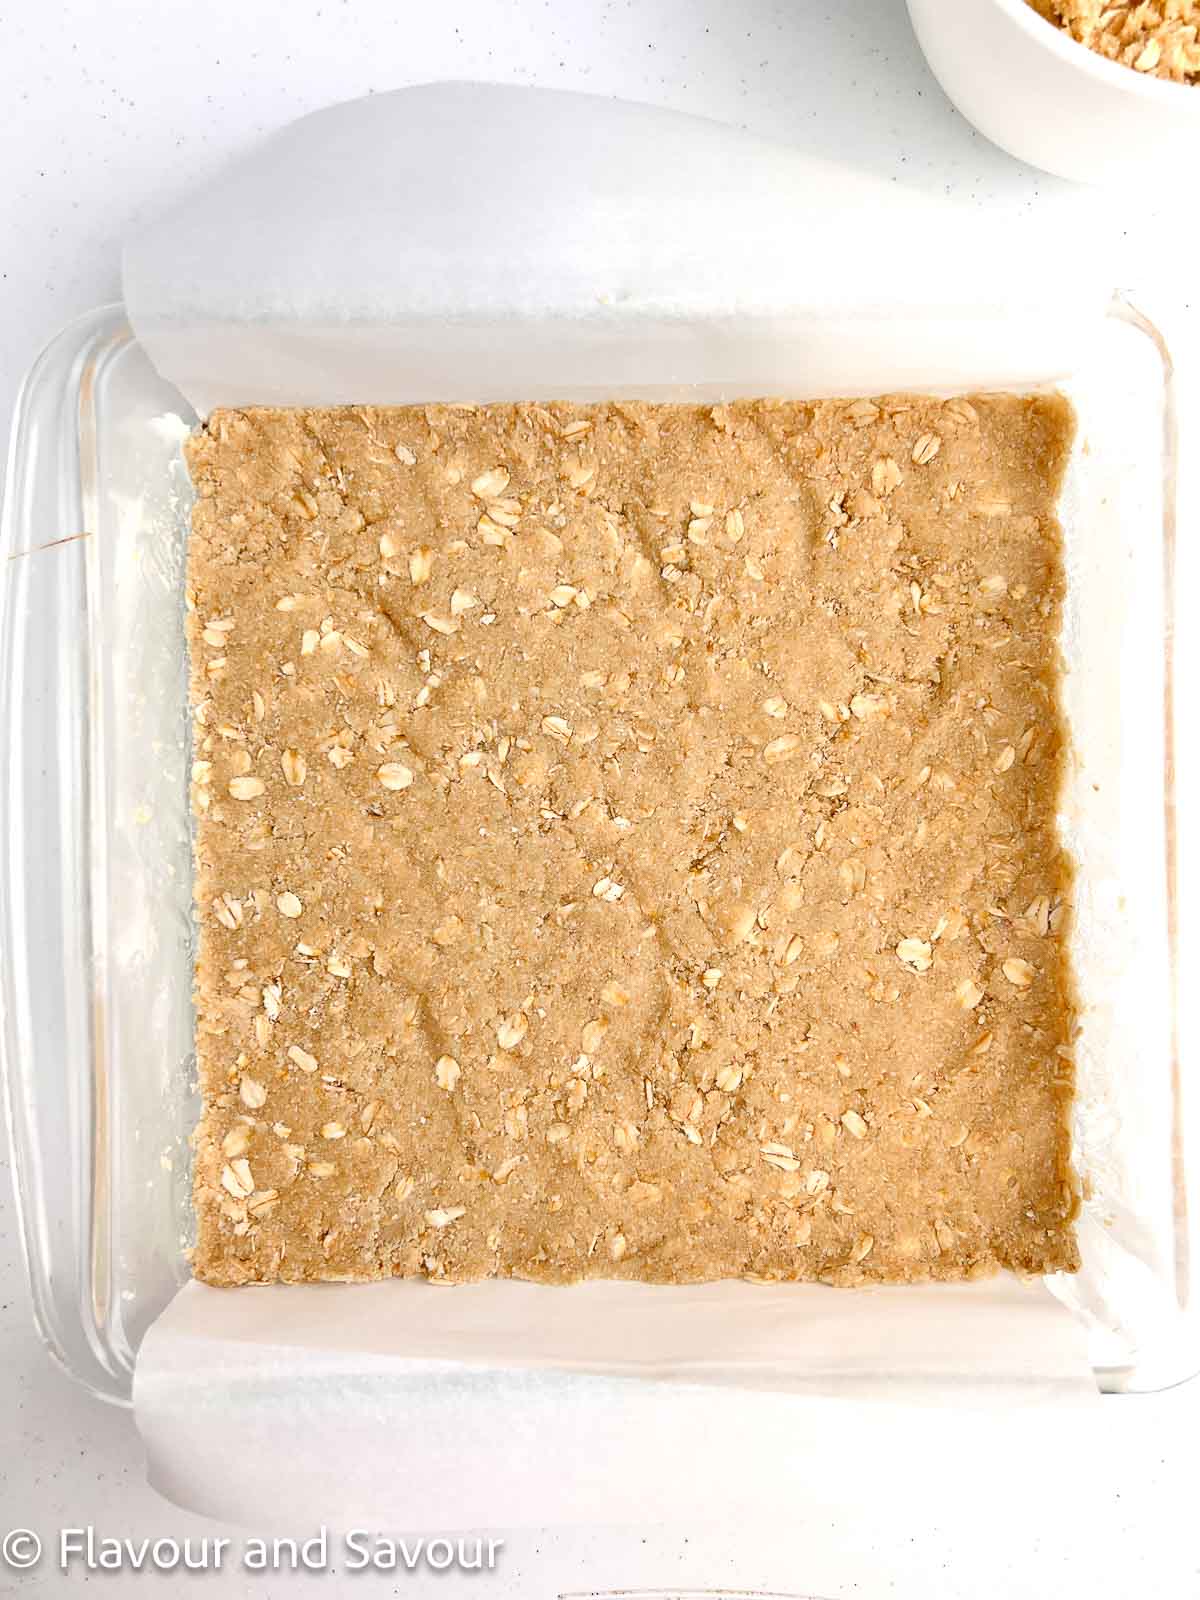 Crust mixture for cherry pie bars pressed into a glass baking pan.